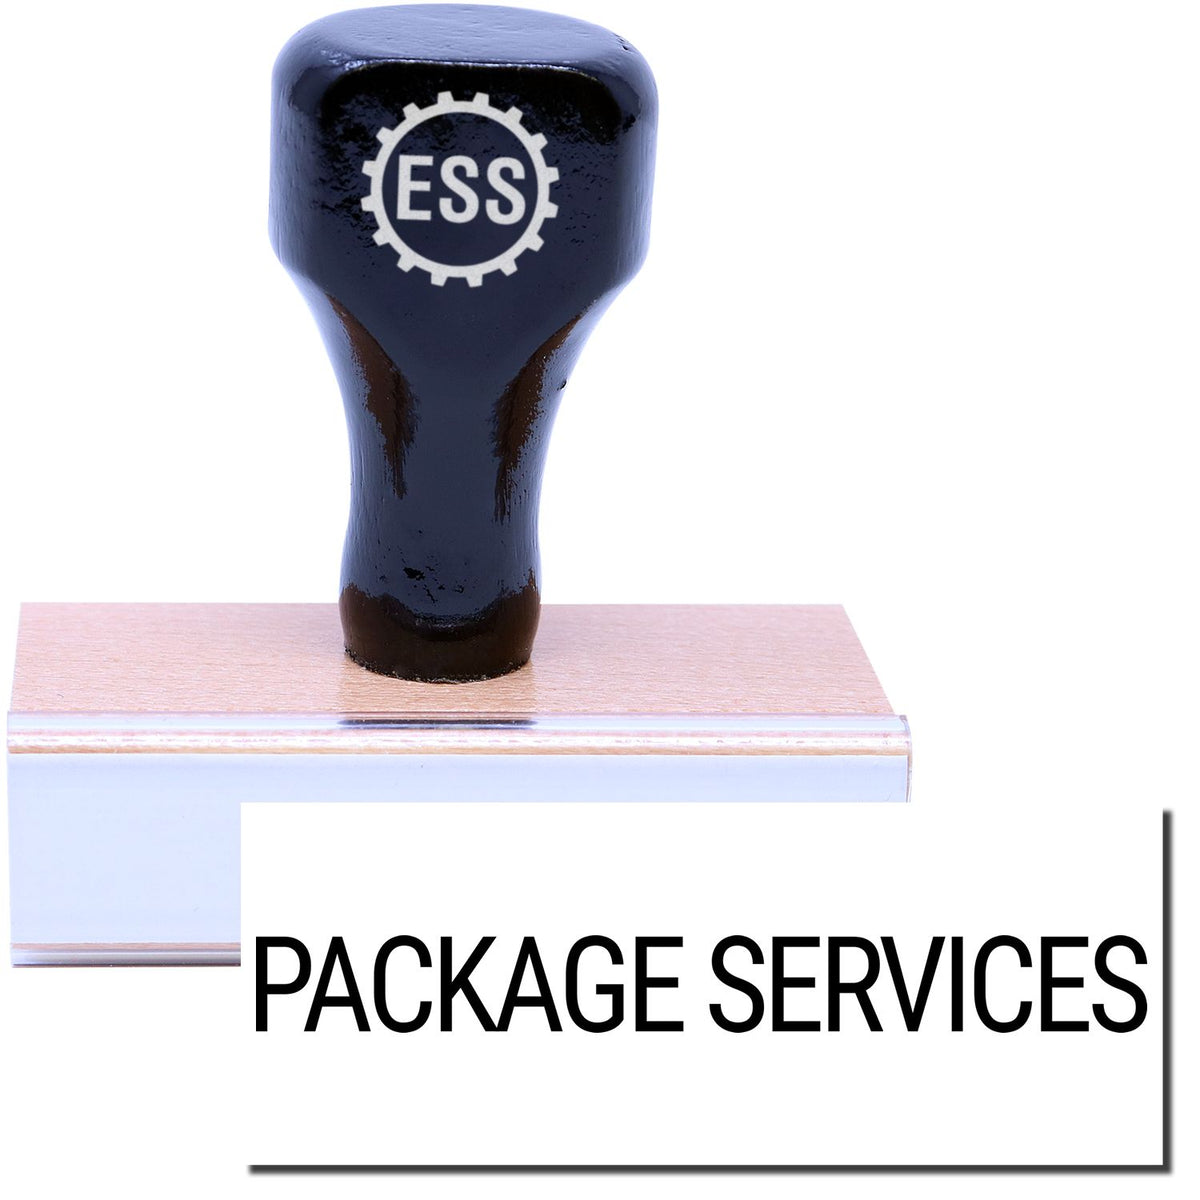 Package Services Rubber Stamp